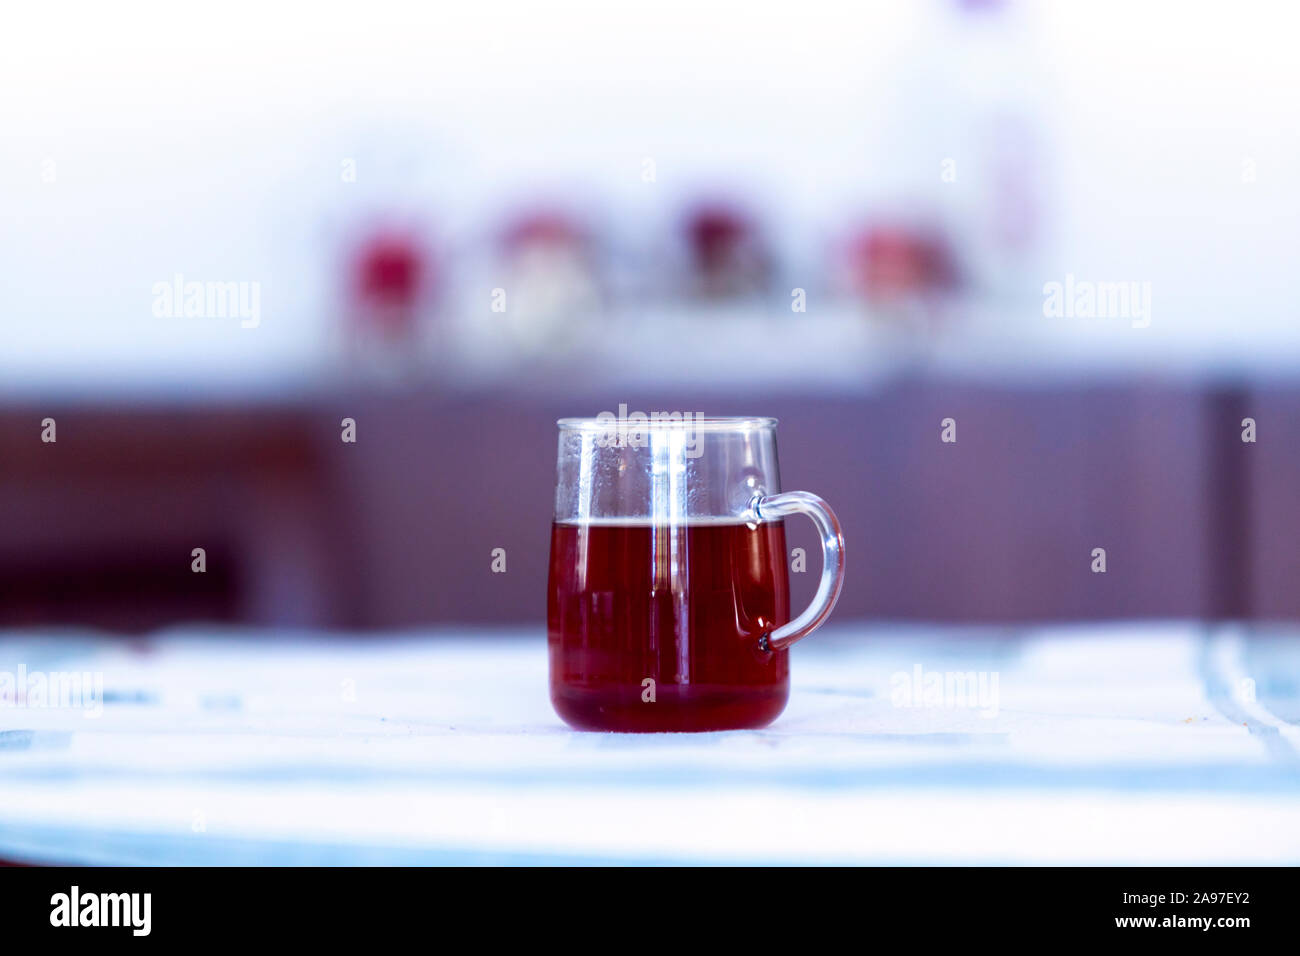 Close up of a glass cup of black tea in shallow depth of field image. Stock Photo